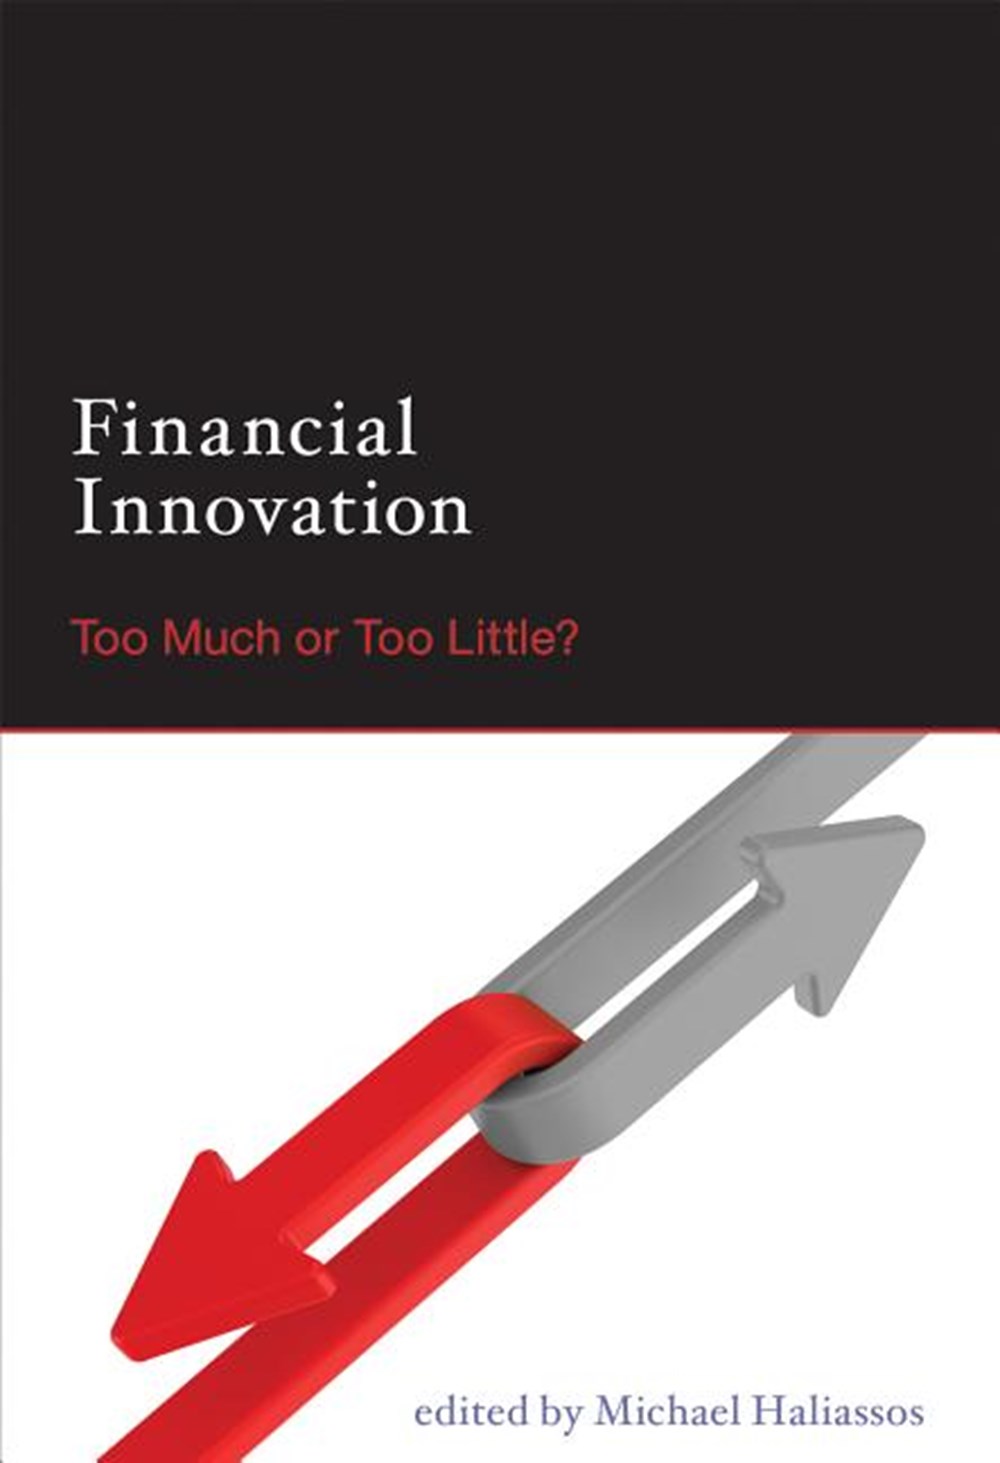 Financial Innovation Too Much or Too Little?